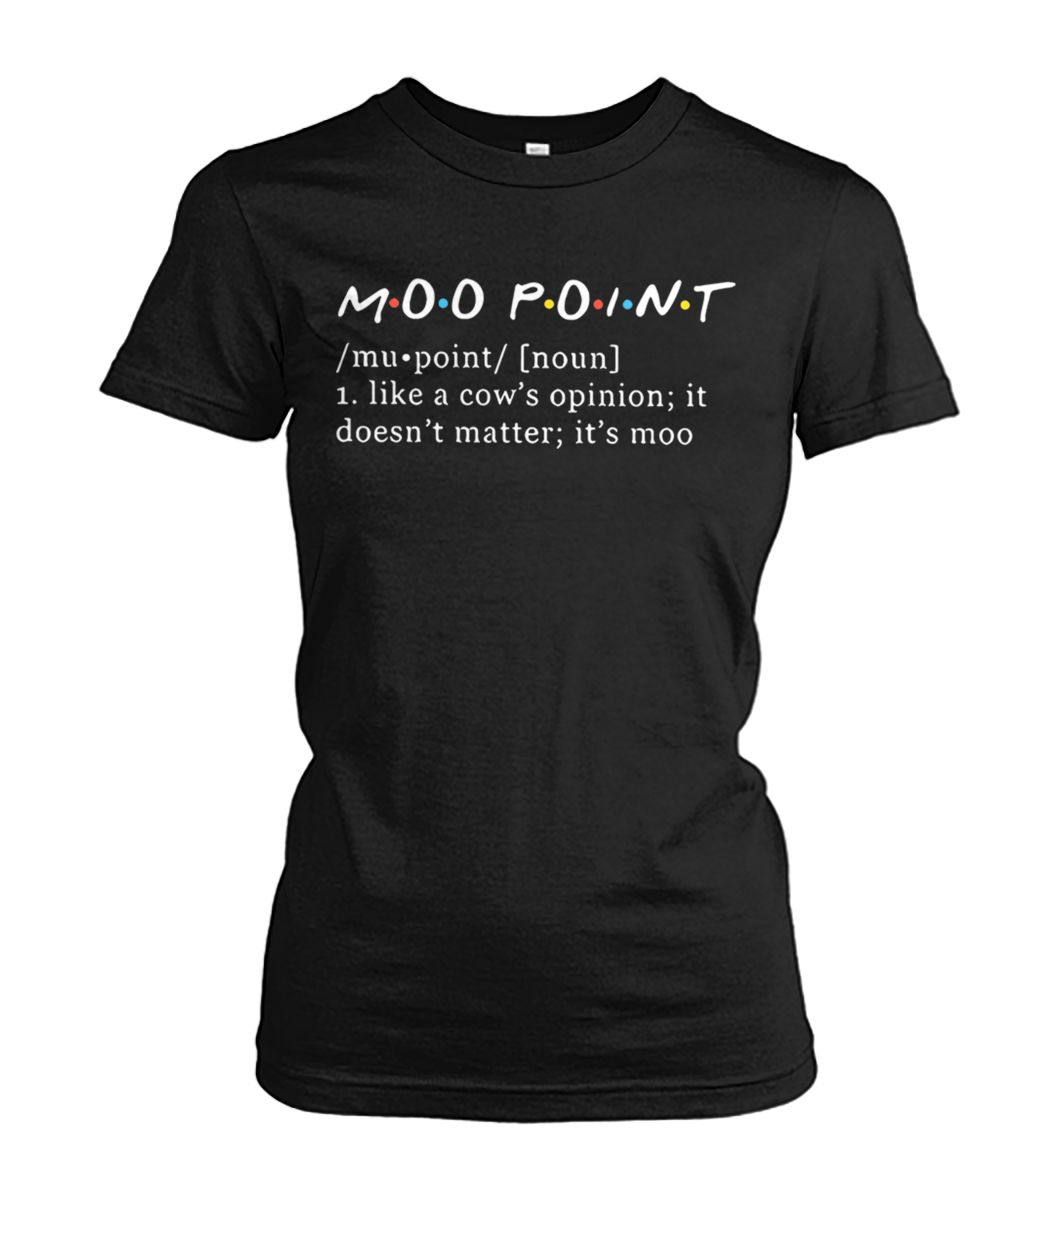 Moo point definition meaning like a cow’s opinion it doesn’t matter it’s moo women's crew tee